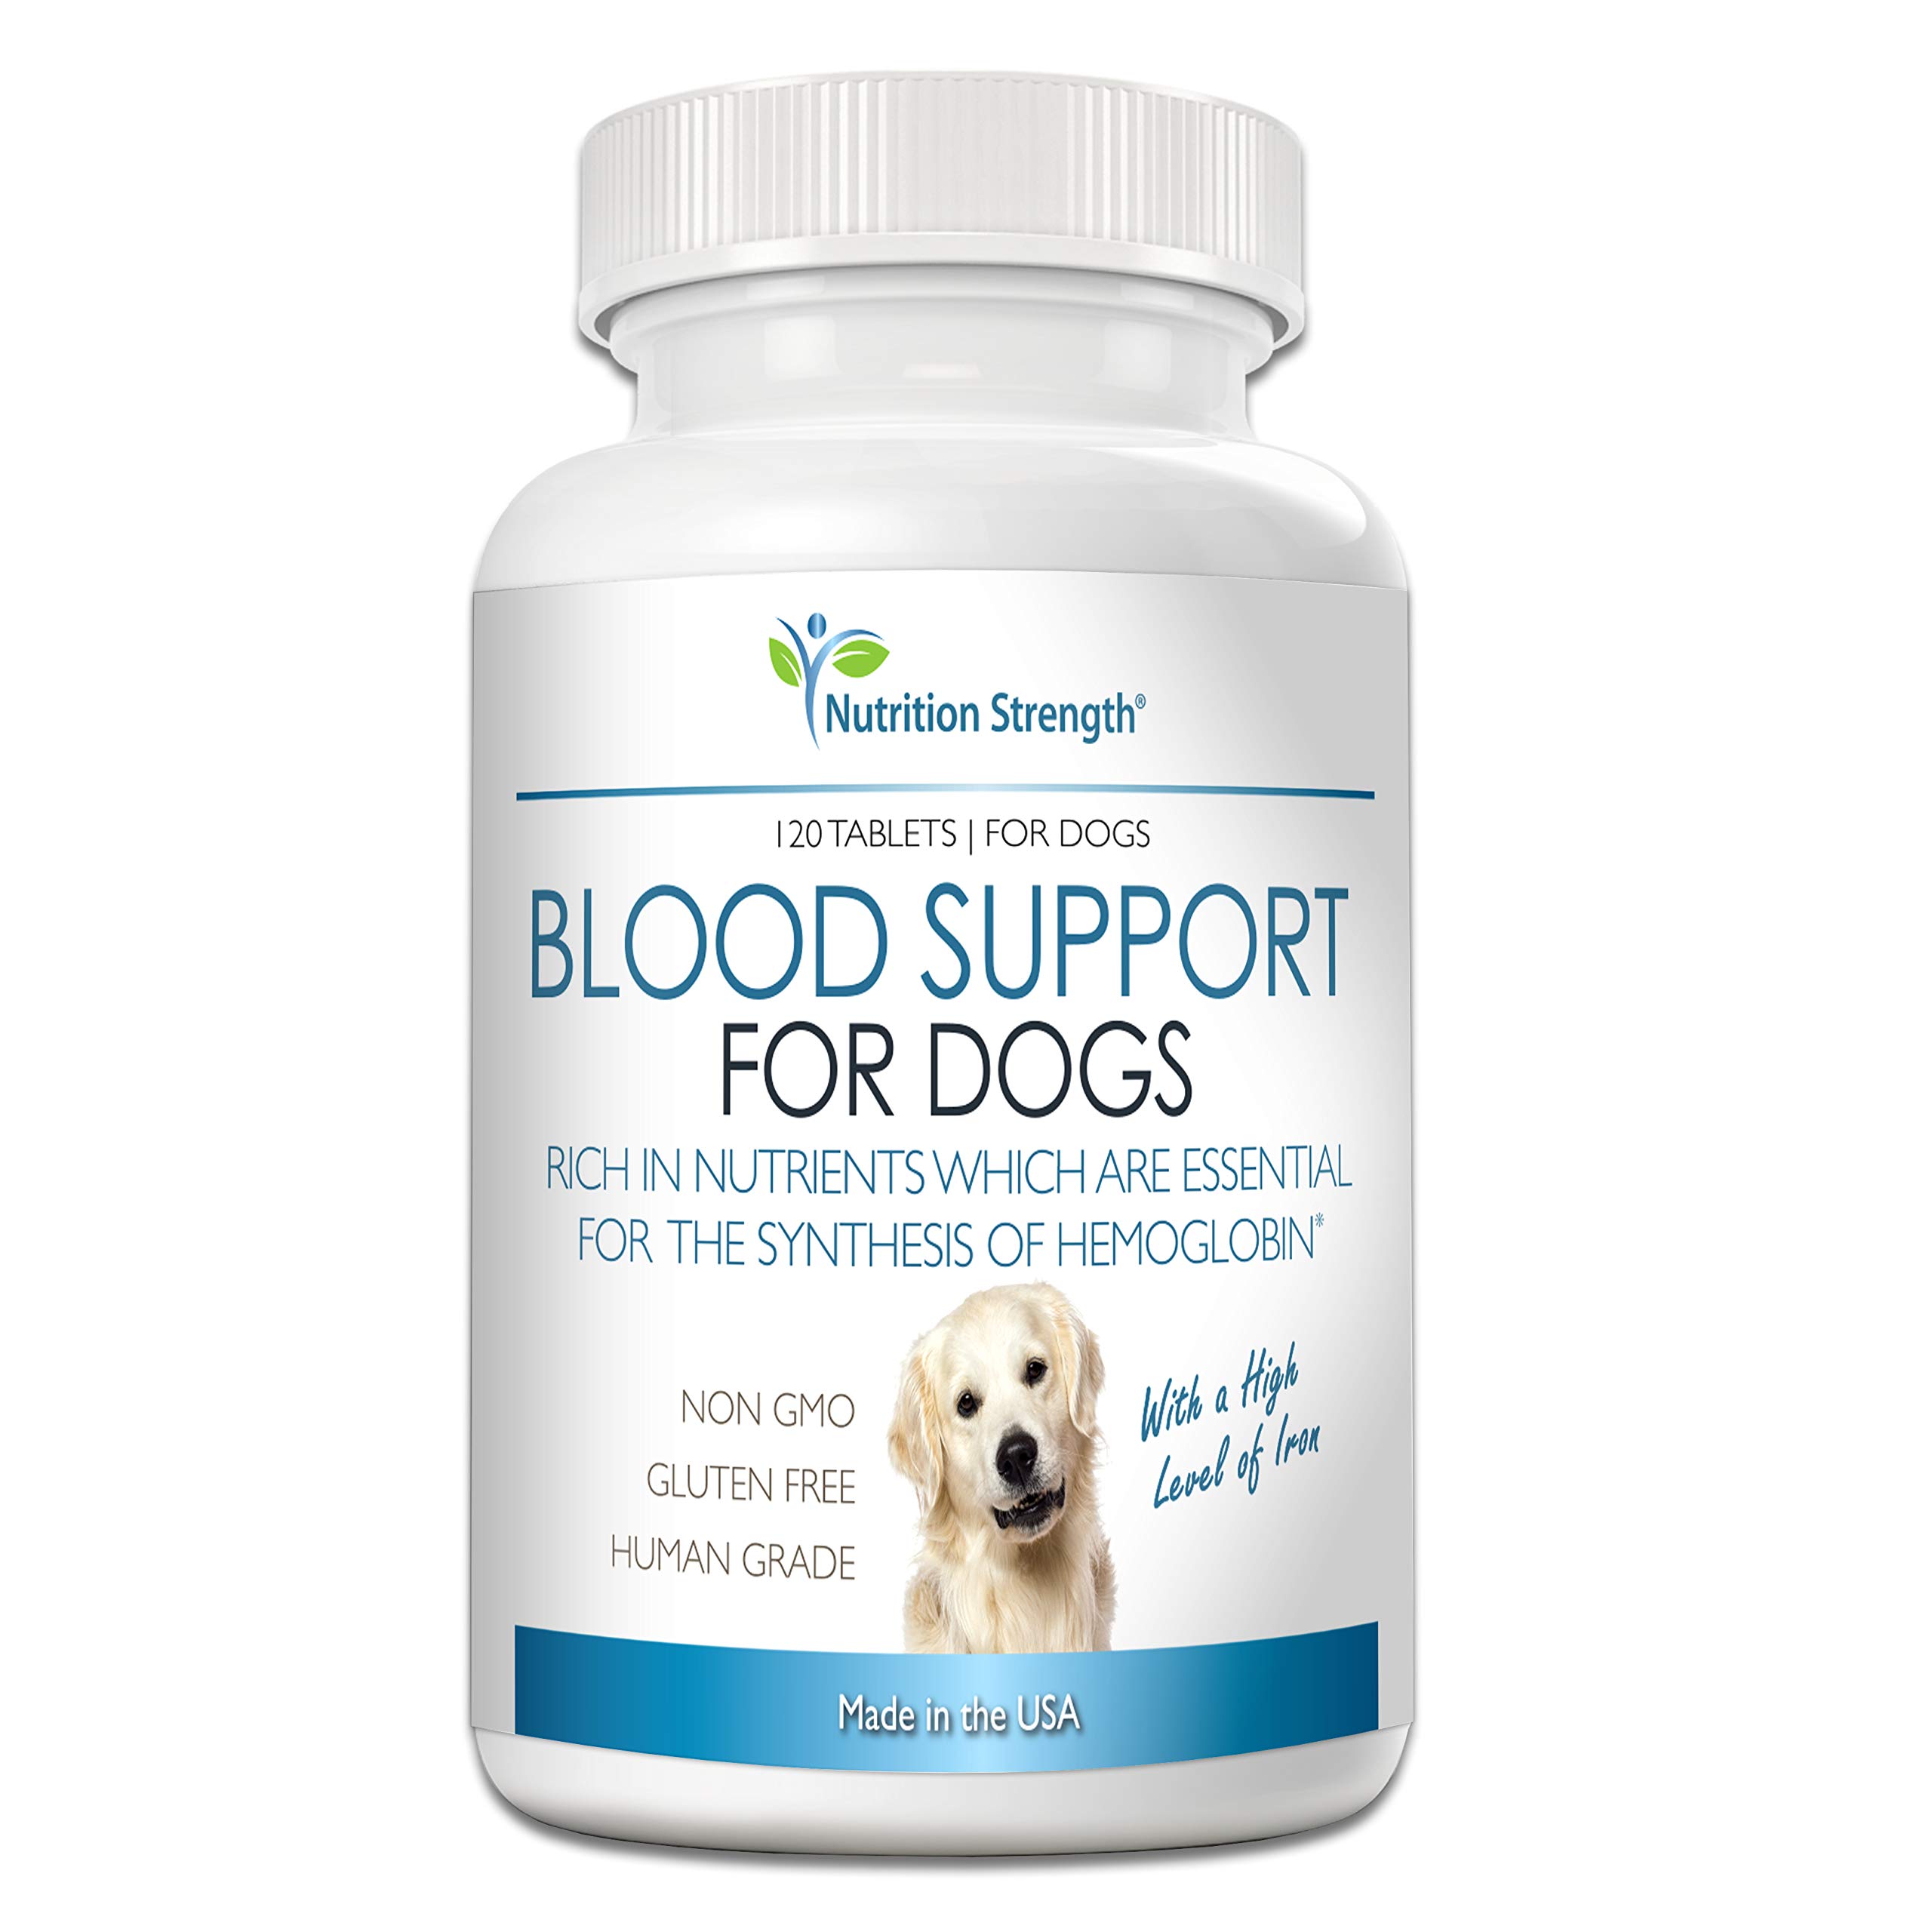 Nutrition Strength Blood Support for Dogs, Supplement for Anemia in Dogs, Promotes Red Blood Cell Health, with a High Level of I